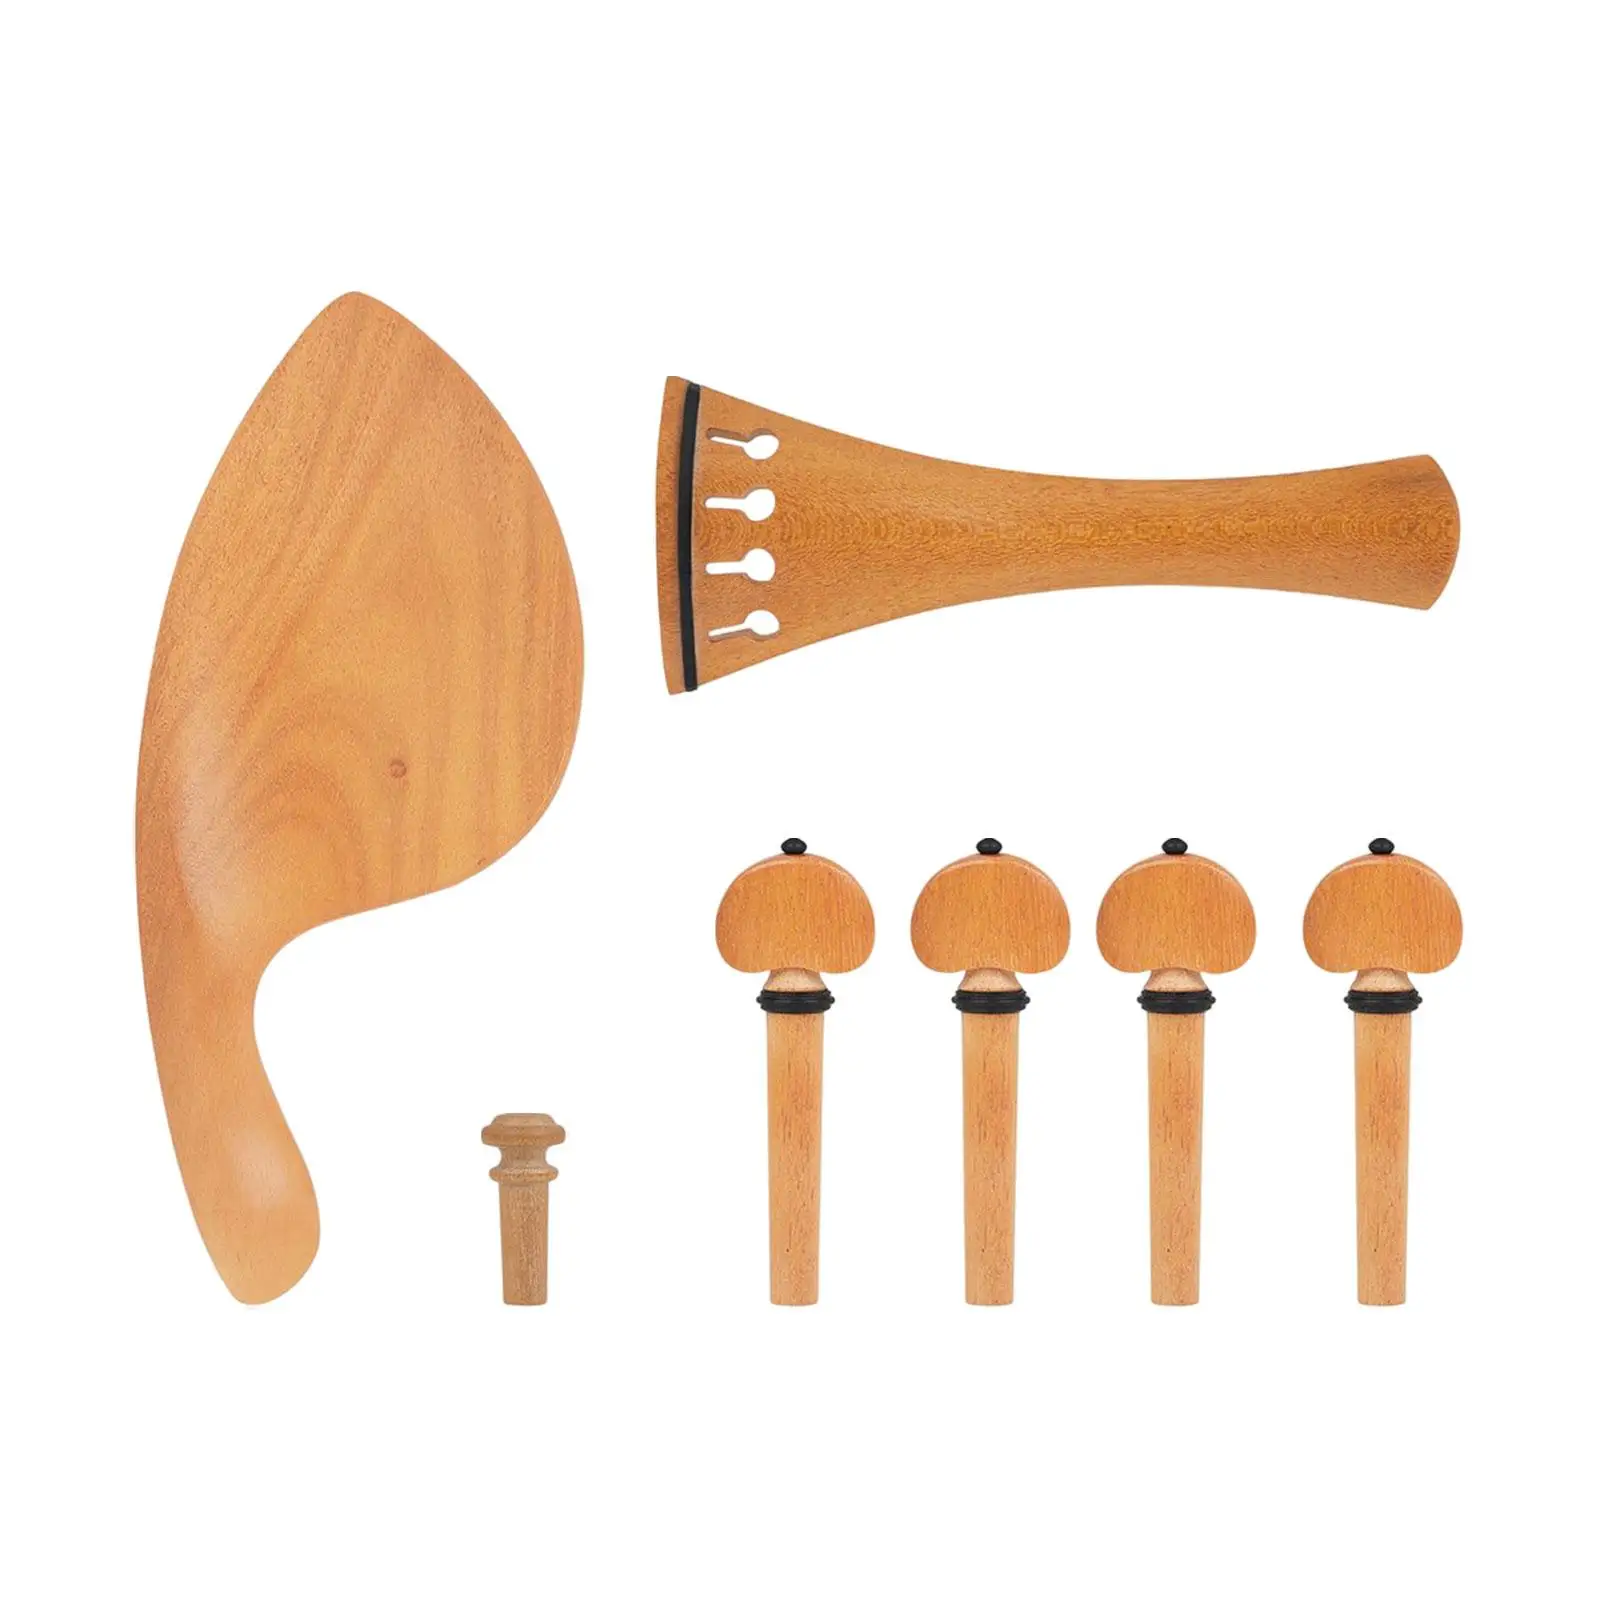 4/4 Violin Accessory Kit Tuning Pegs Violin Tailpiece Chinrest Endpin Violin Fittings Set Wood for Violin Musician Music Lover